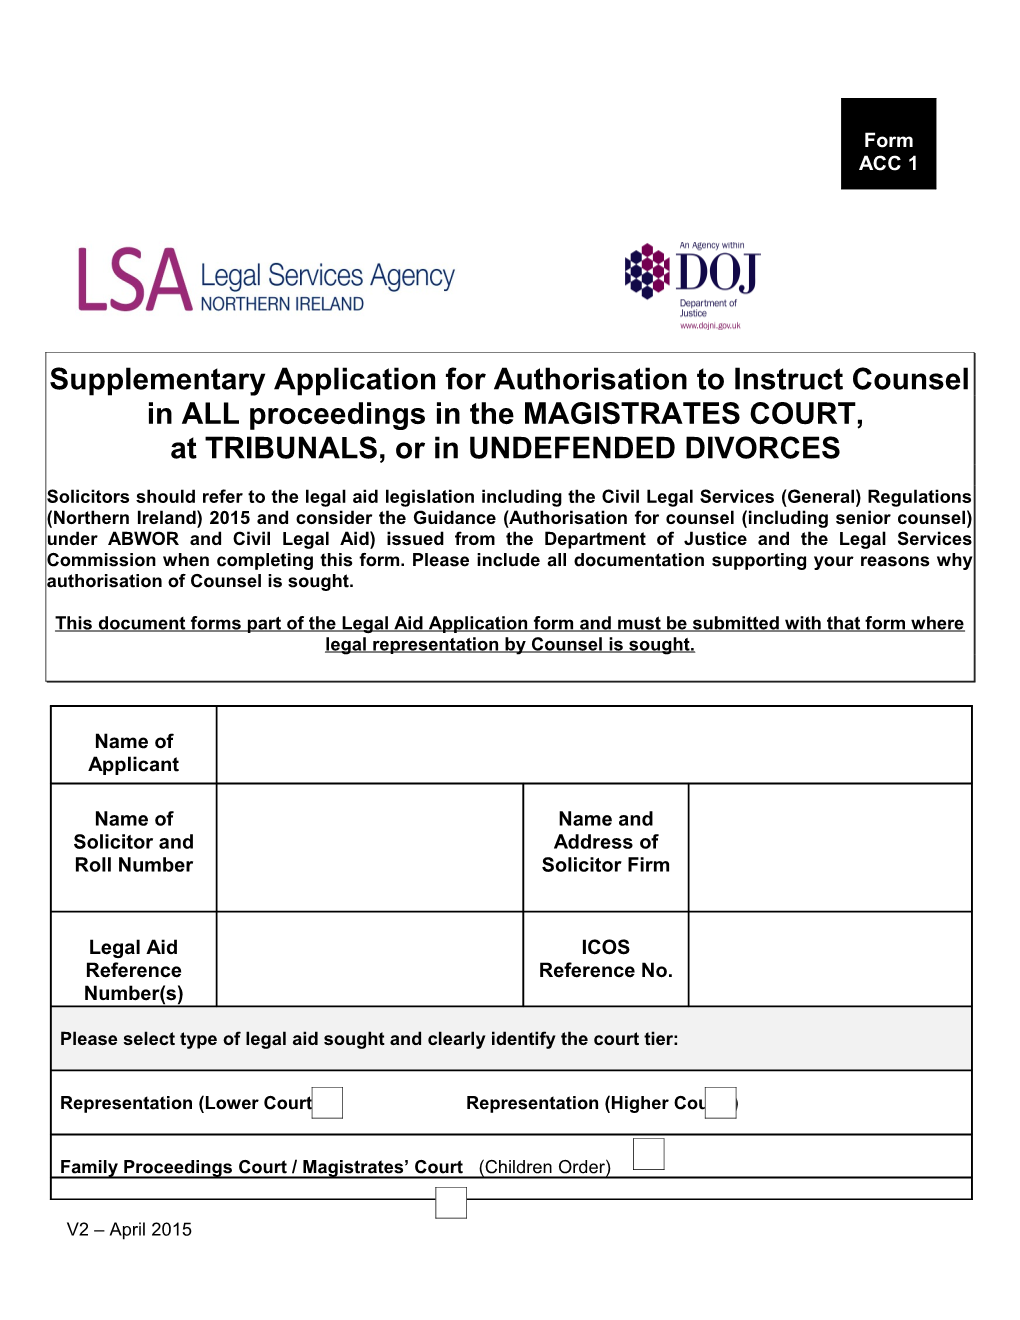 Supplementary Application for Authorisation to Instruct Counsel